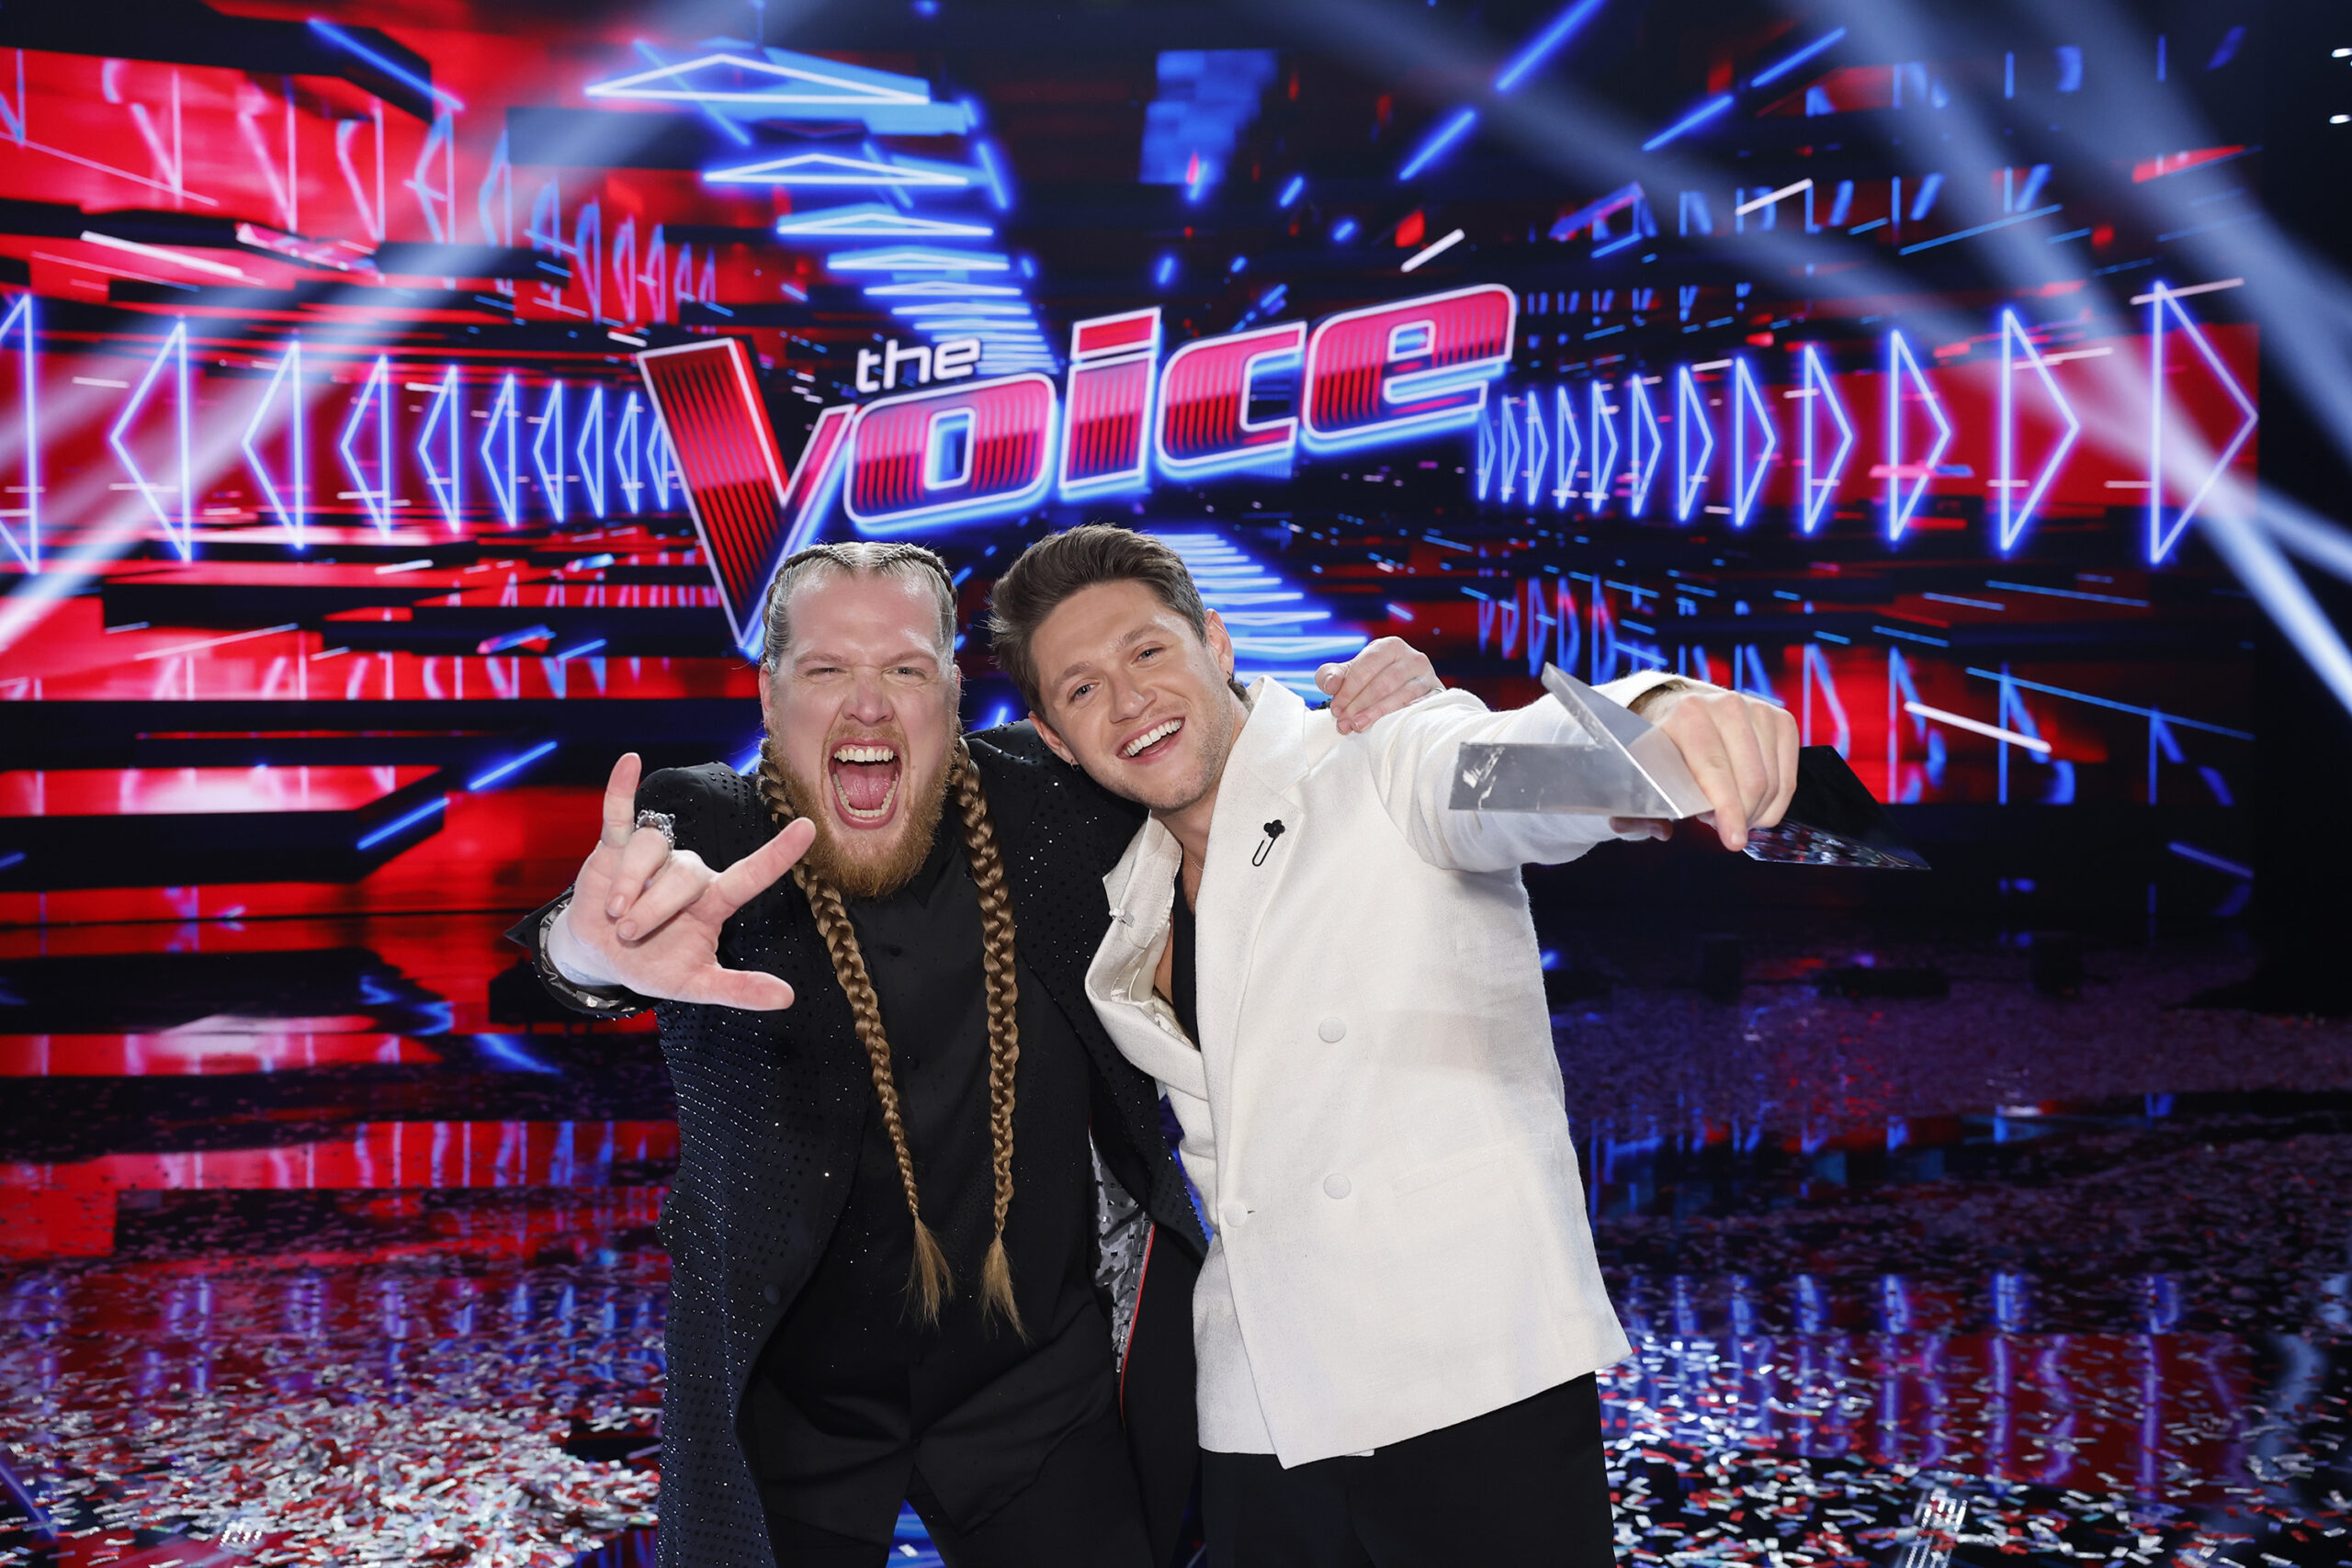 The Voice 24 Winner Huntley Gives Niall Horan Two Wins!